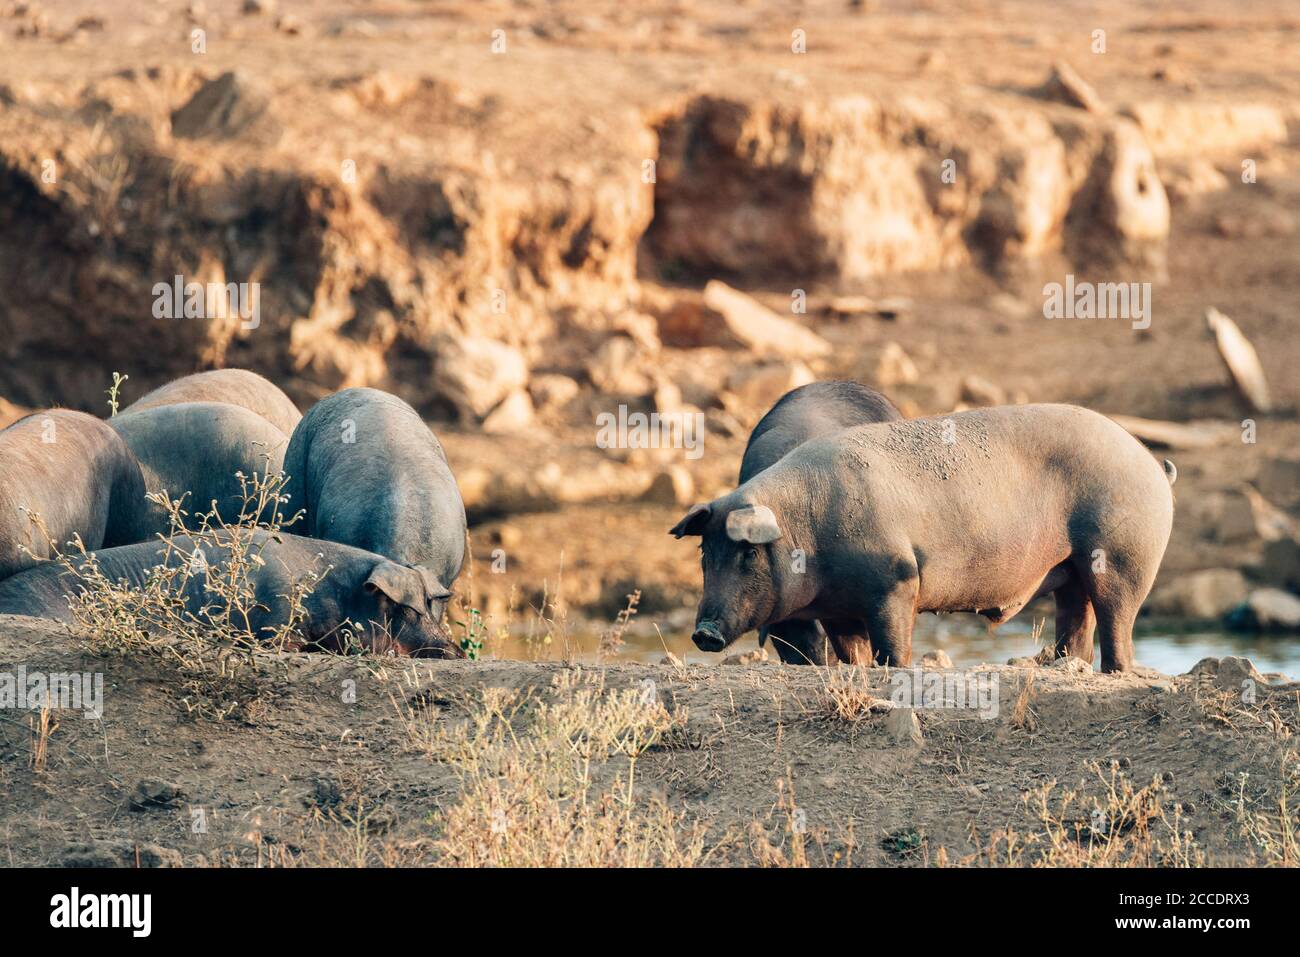 pigs in freedom in extremadura Stock Photo